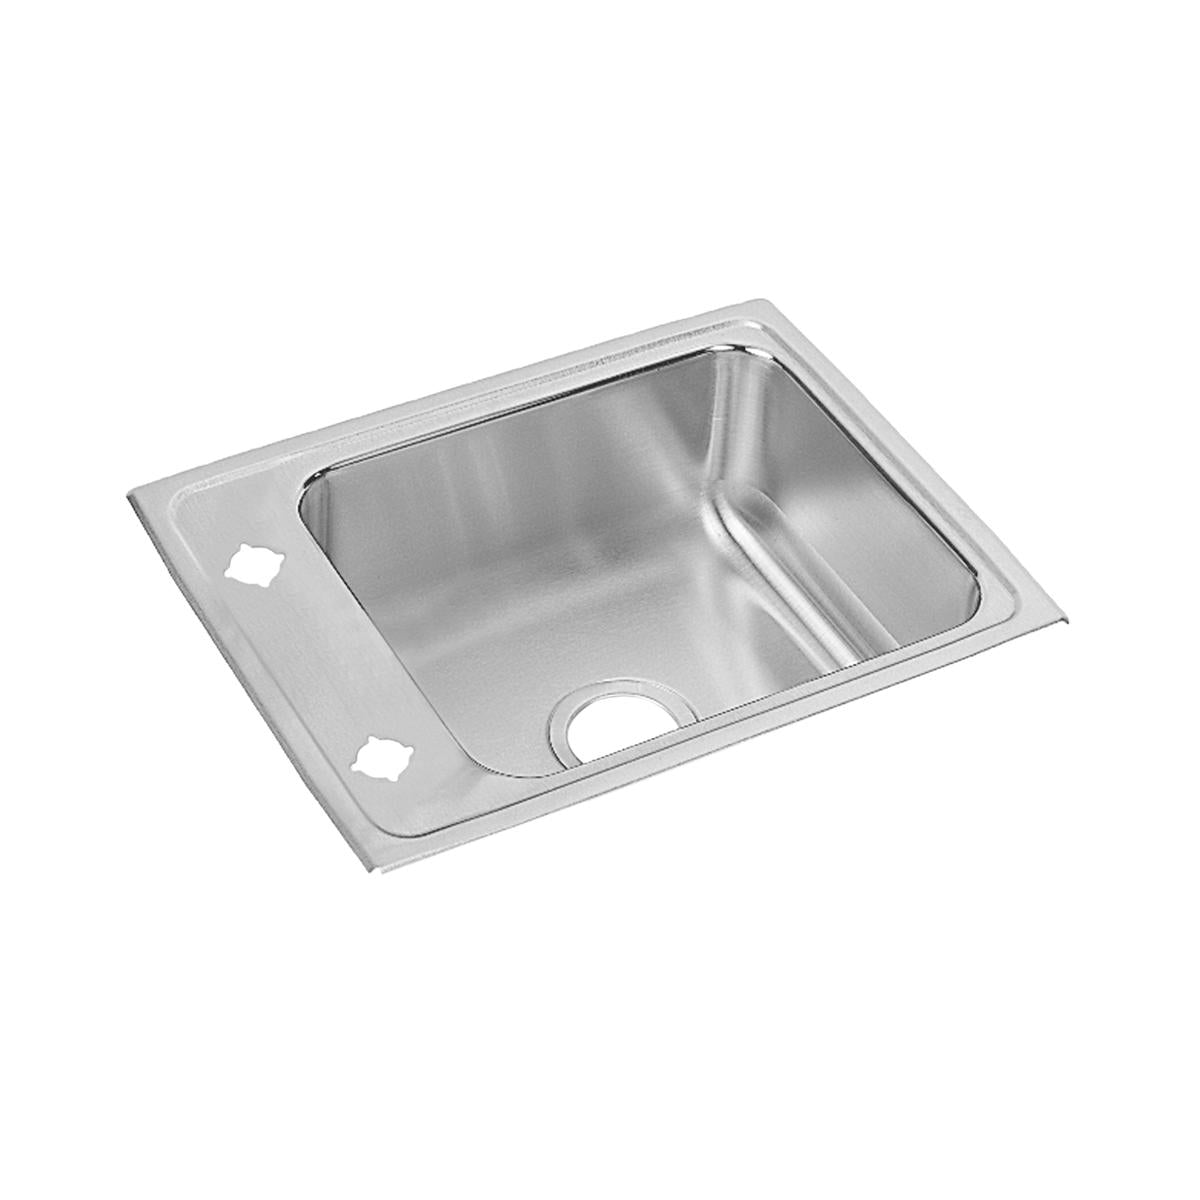 Elkay Lustertone Classic 22" x 17" x 4" Single Bowl Drop-in Classroom ADA Sink with Quick-clip